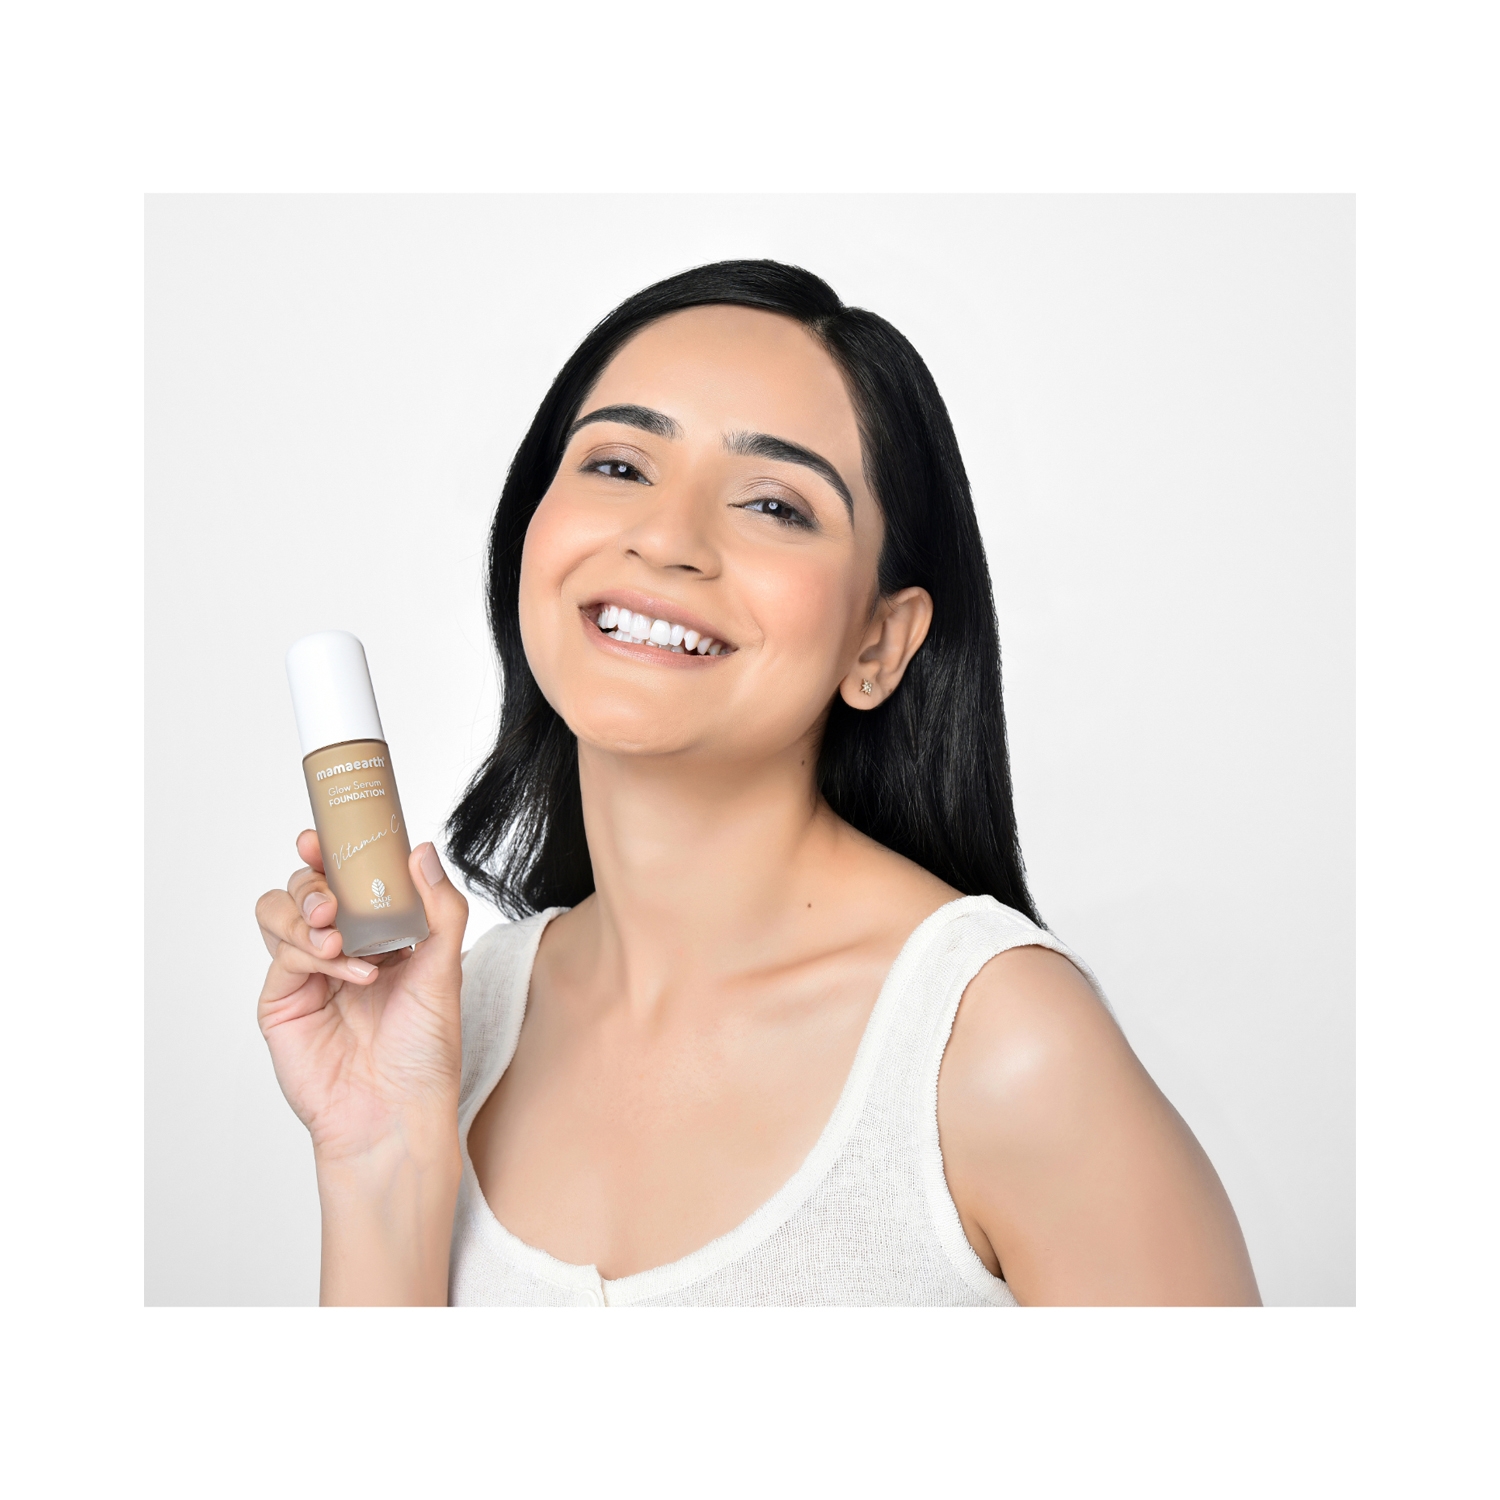 Mamaearth Nude Glow Serum Foundation Shade for Instant Glow